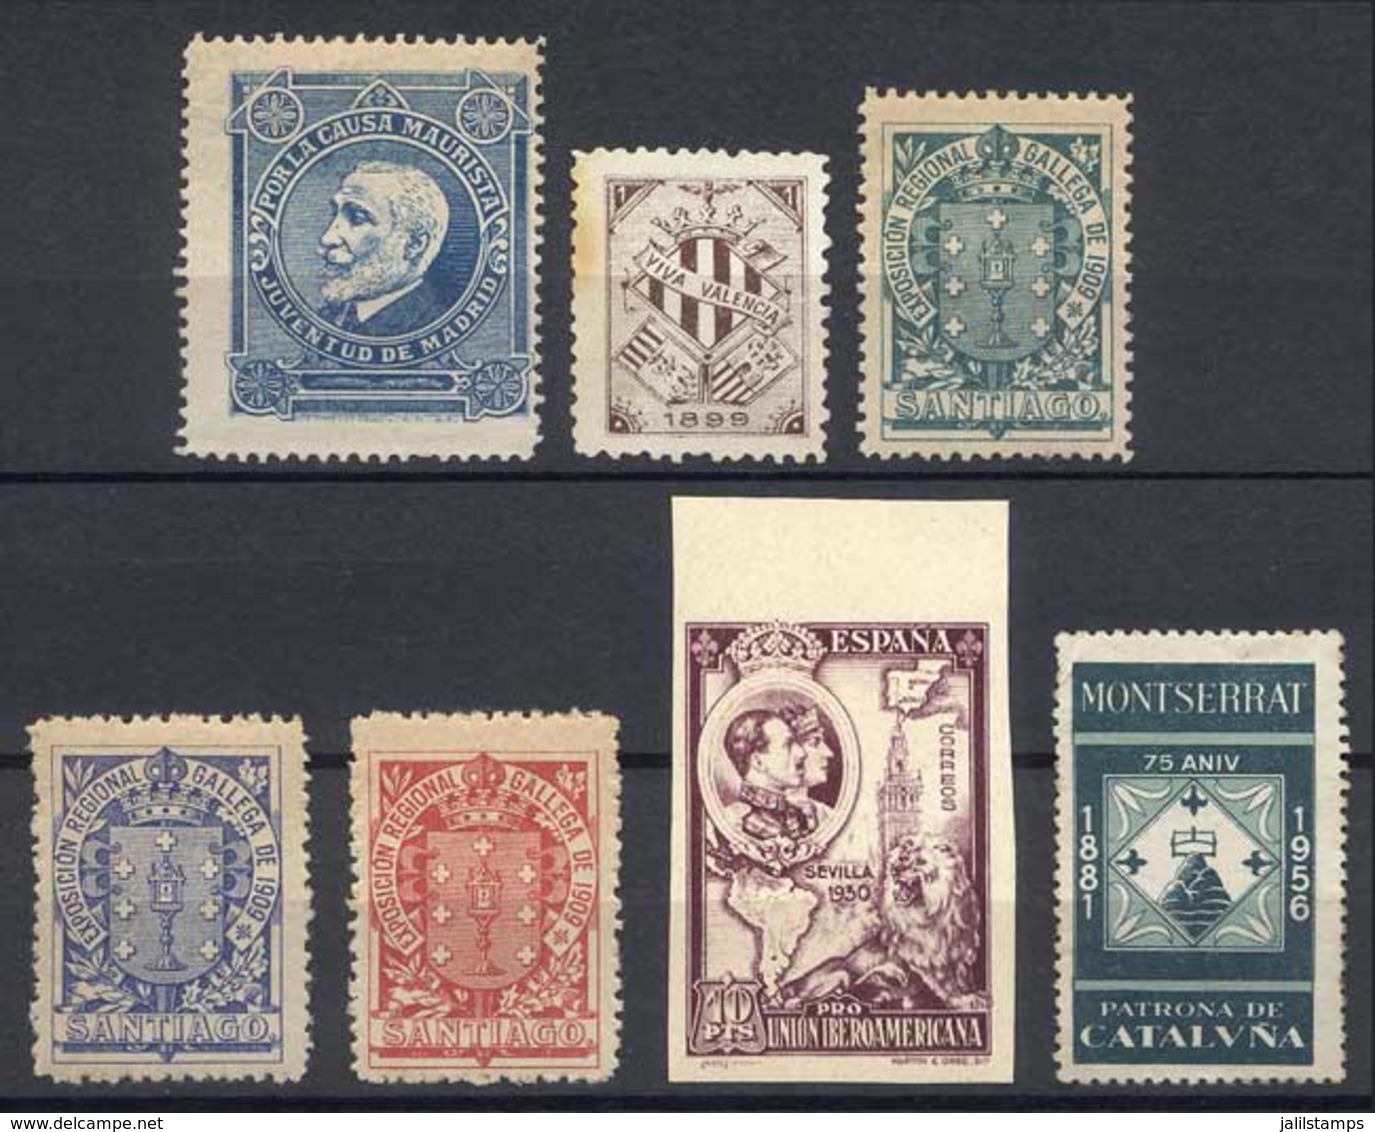 SPAIN: Lot Of Various Cinderellas, Interesting, VF Quality, Low Starting Price! - Colecciones